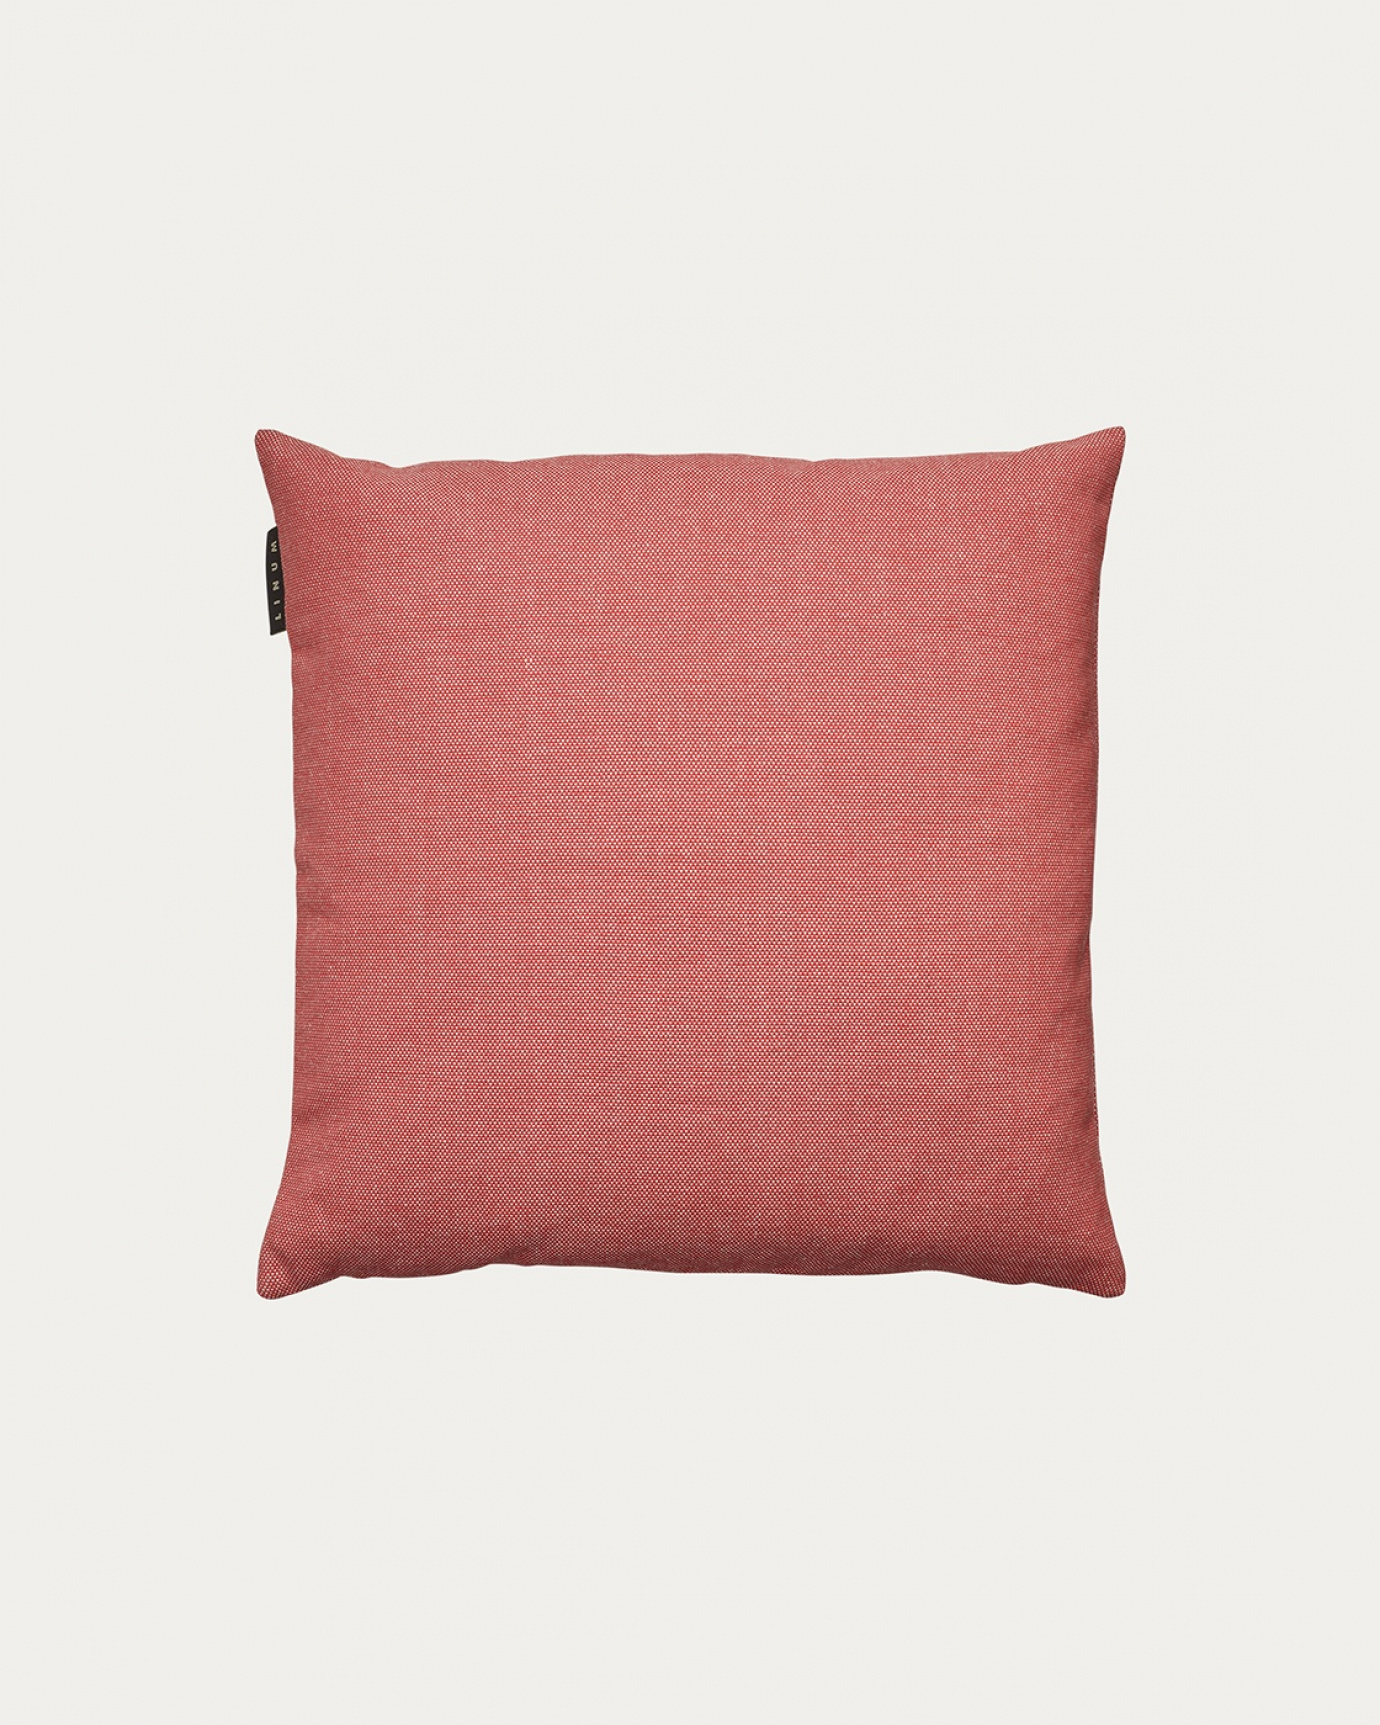 Product image coral red PEPPER cushion cover made of soft cotton from LINUM DESIGN. Easy to wash and durable for generations. Size 40x40 cm.